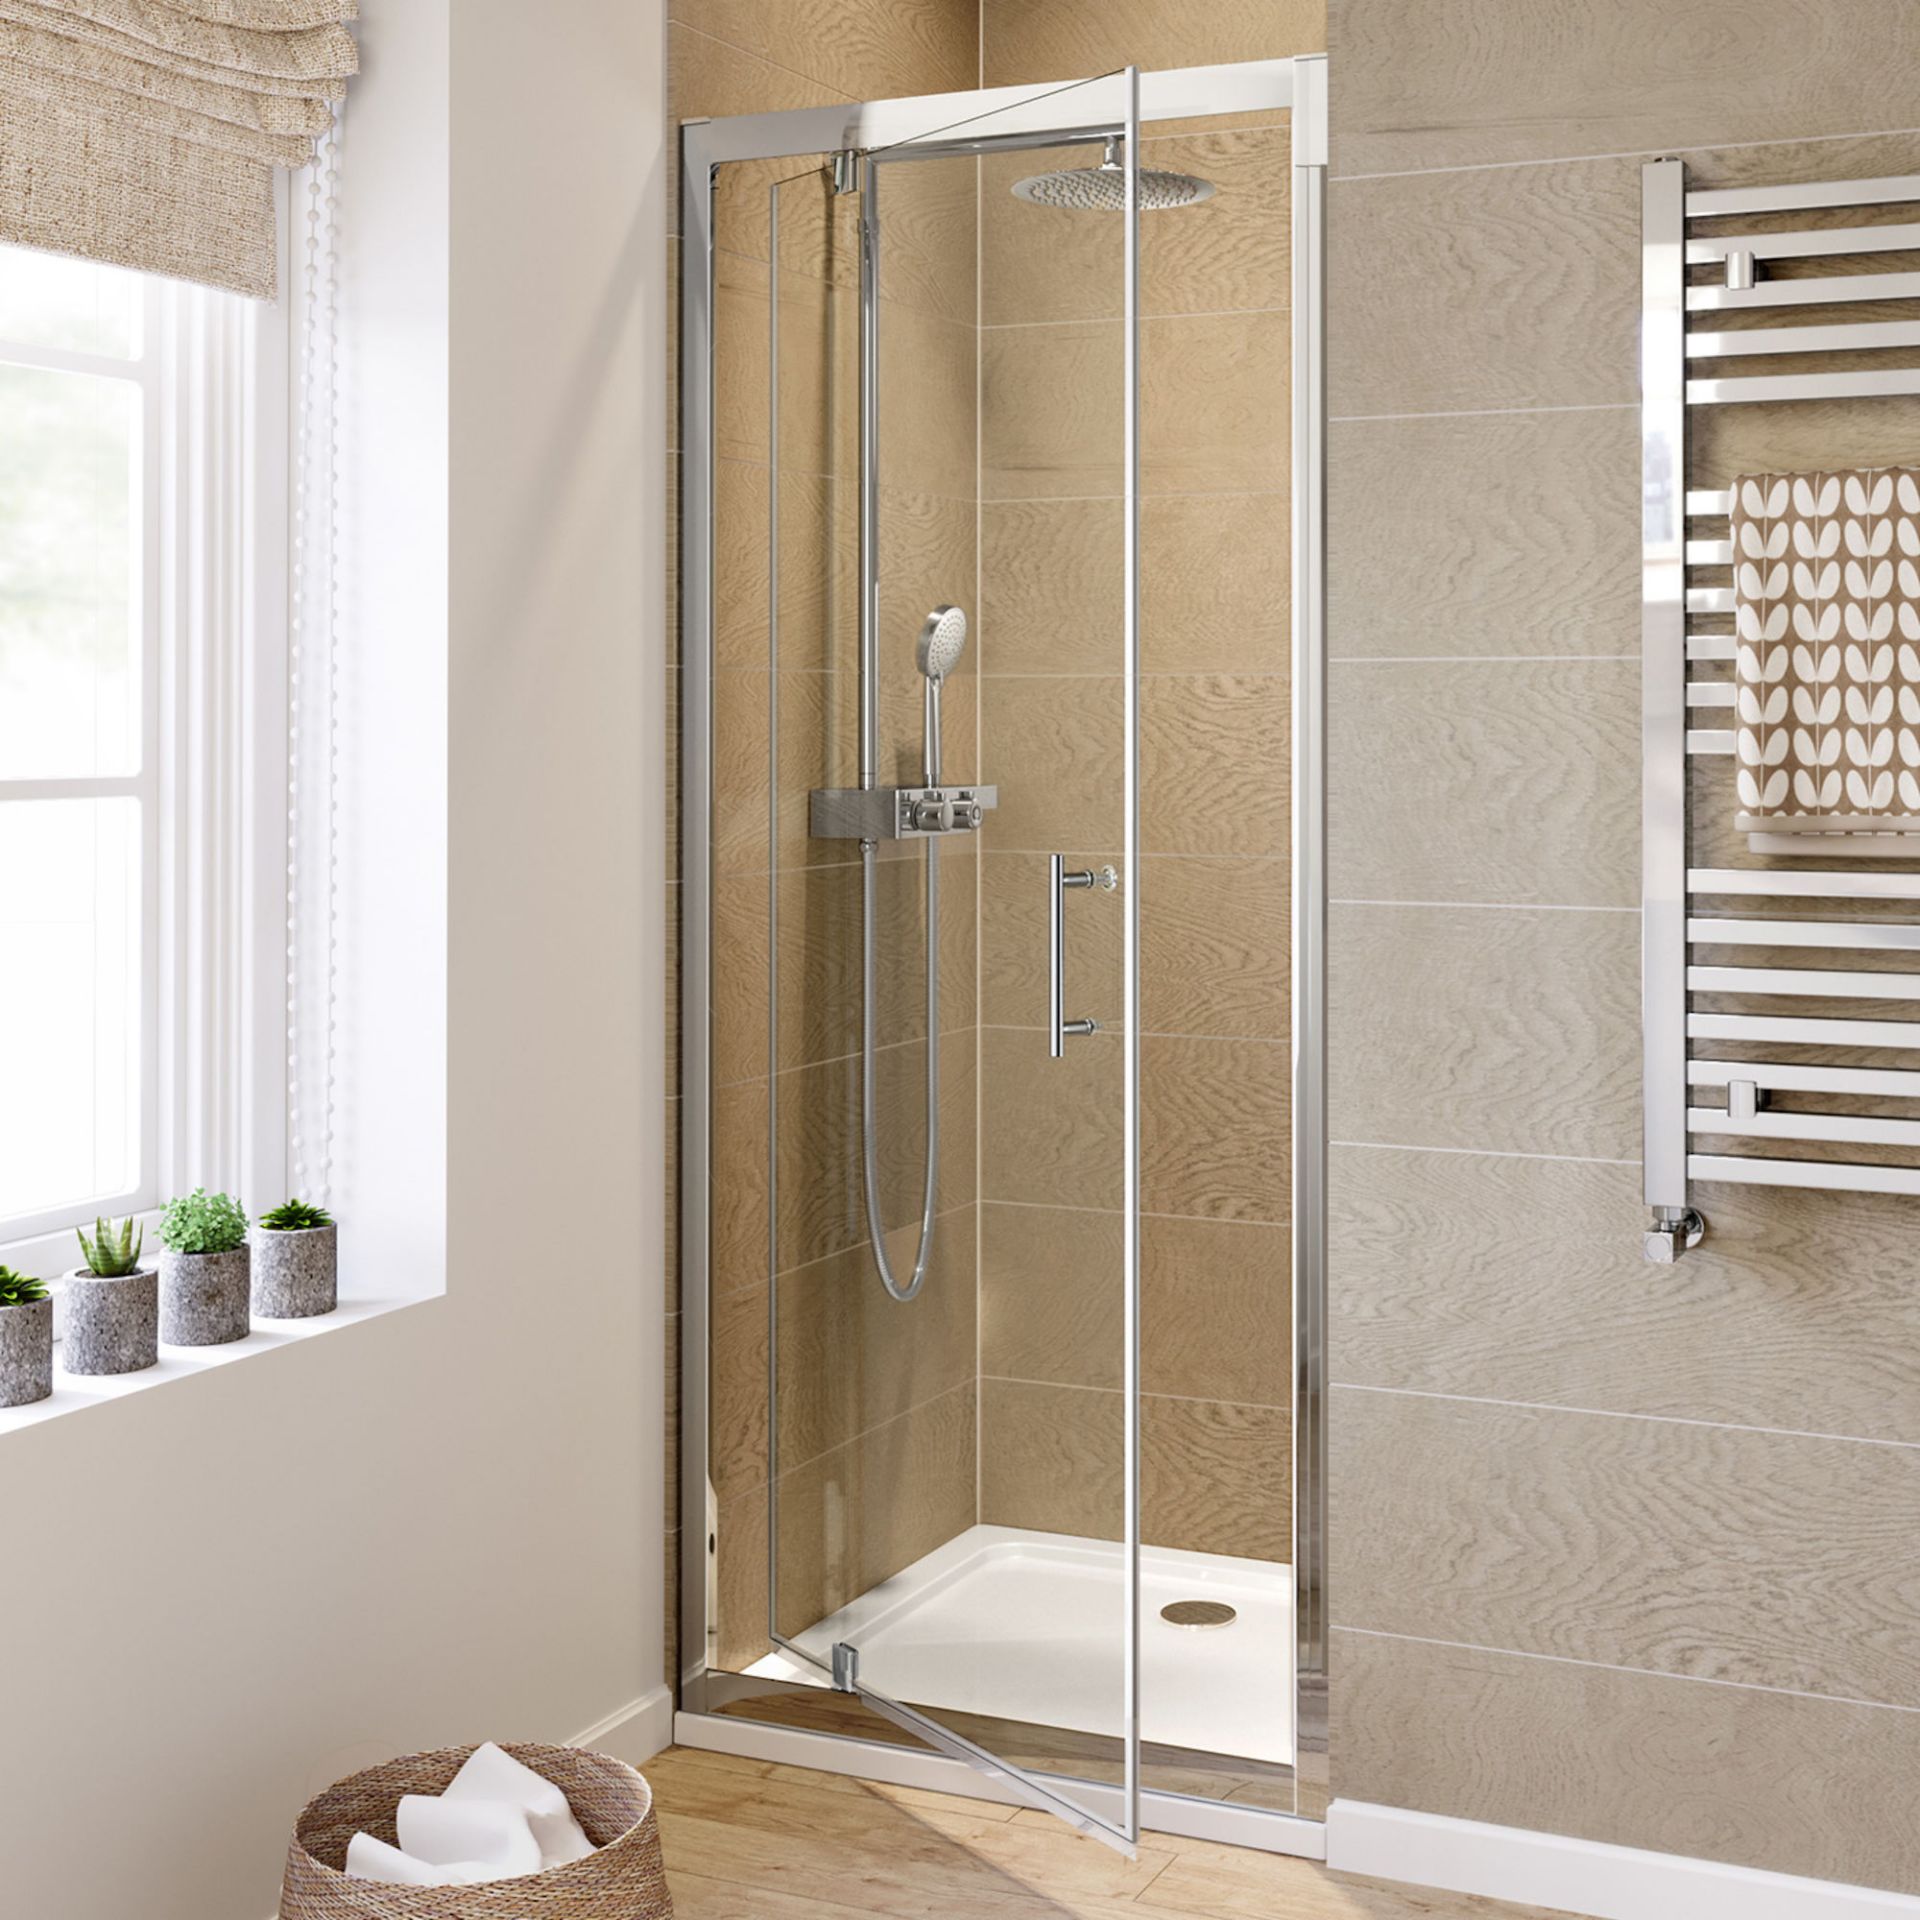 NEW (N14) 900mm- 6mm - Elements Pivot Shower Door. RRP £299.99. 6mm Safety Glass Fully waterp...